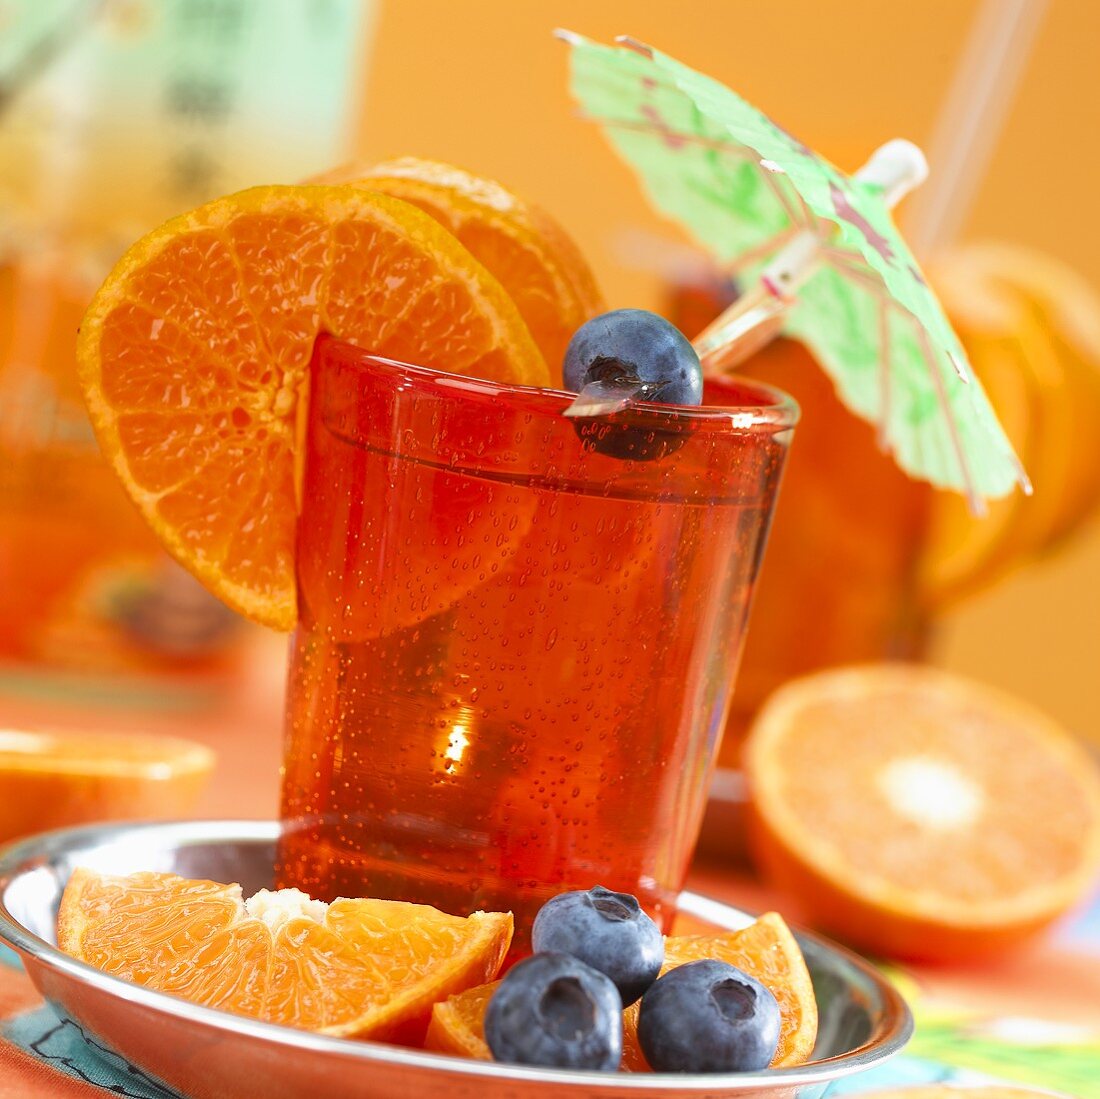 Clementine juice with cocktail umbrellas and garnished with blue berries